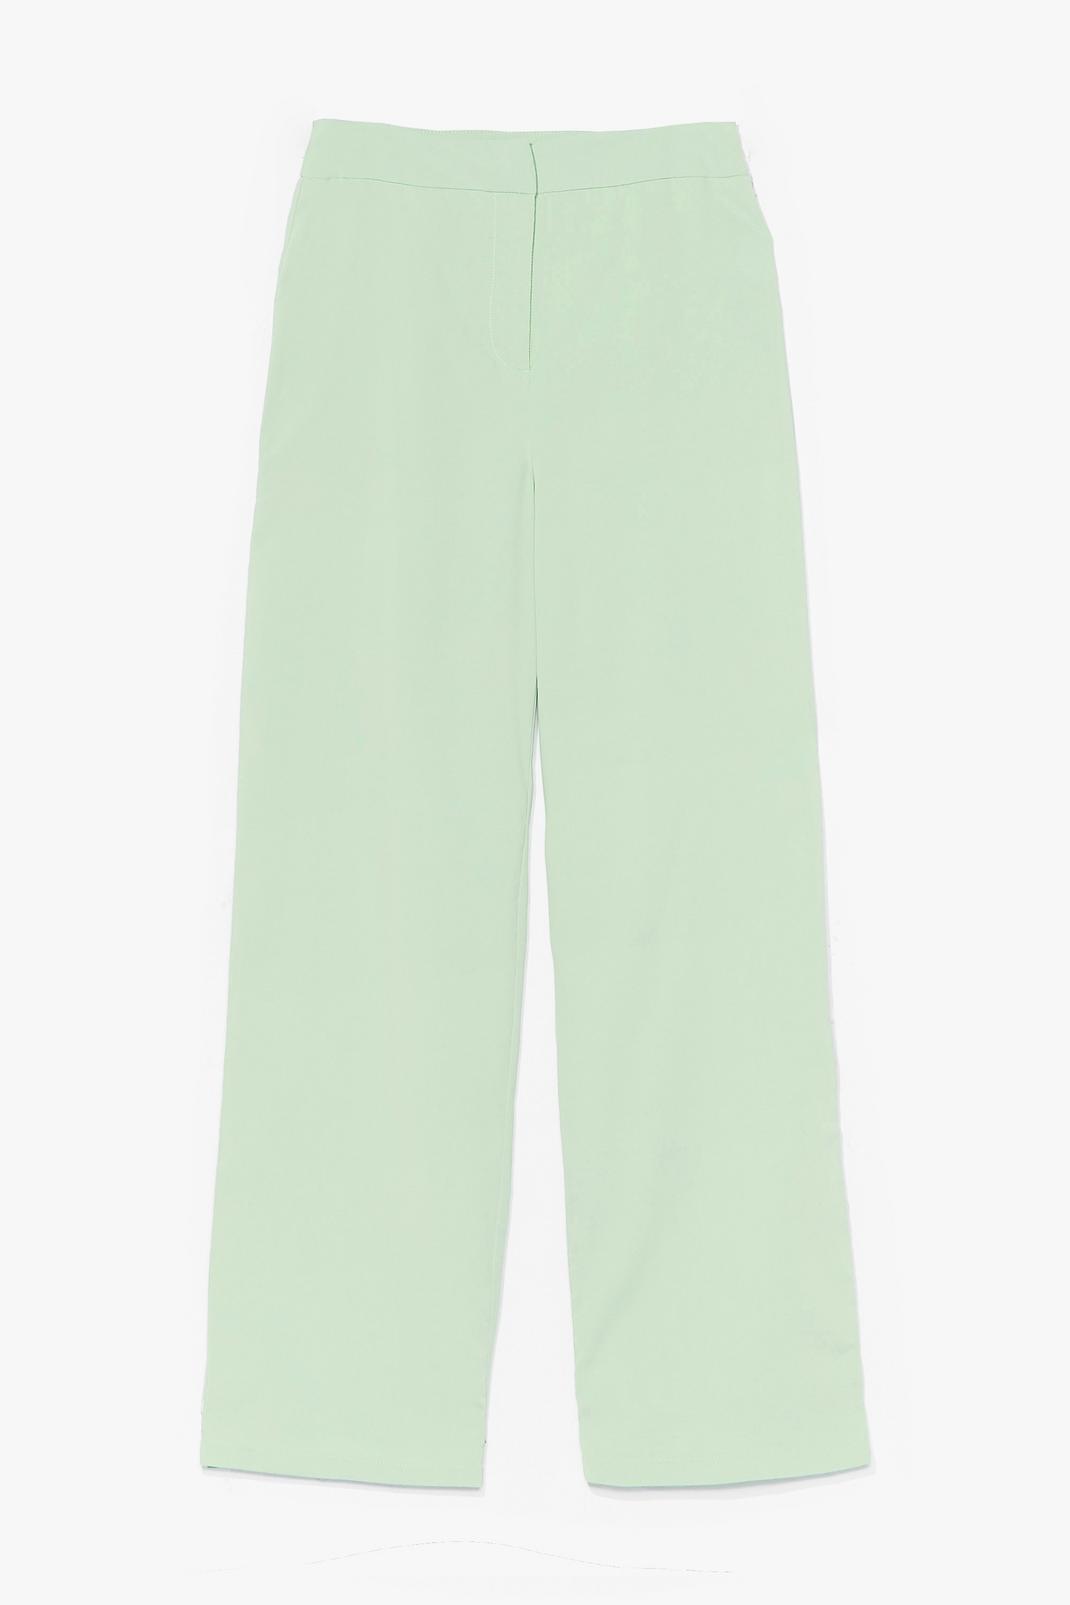 Mint Let's Not Waist Time High-Waisted Trousers image number 1